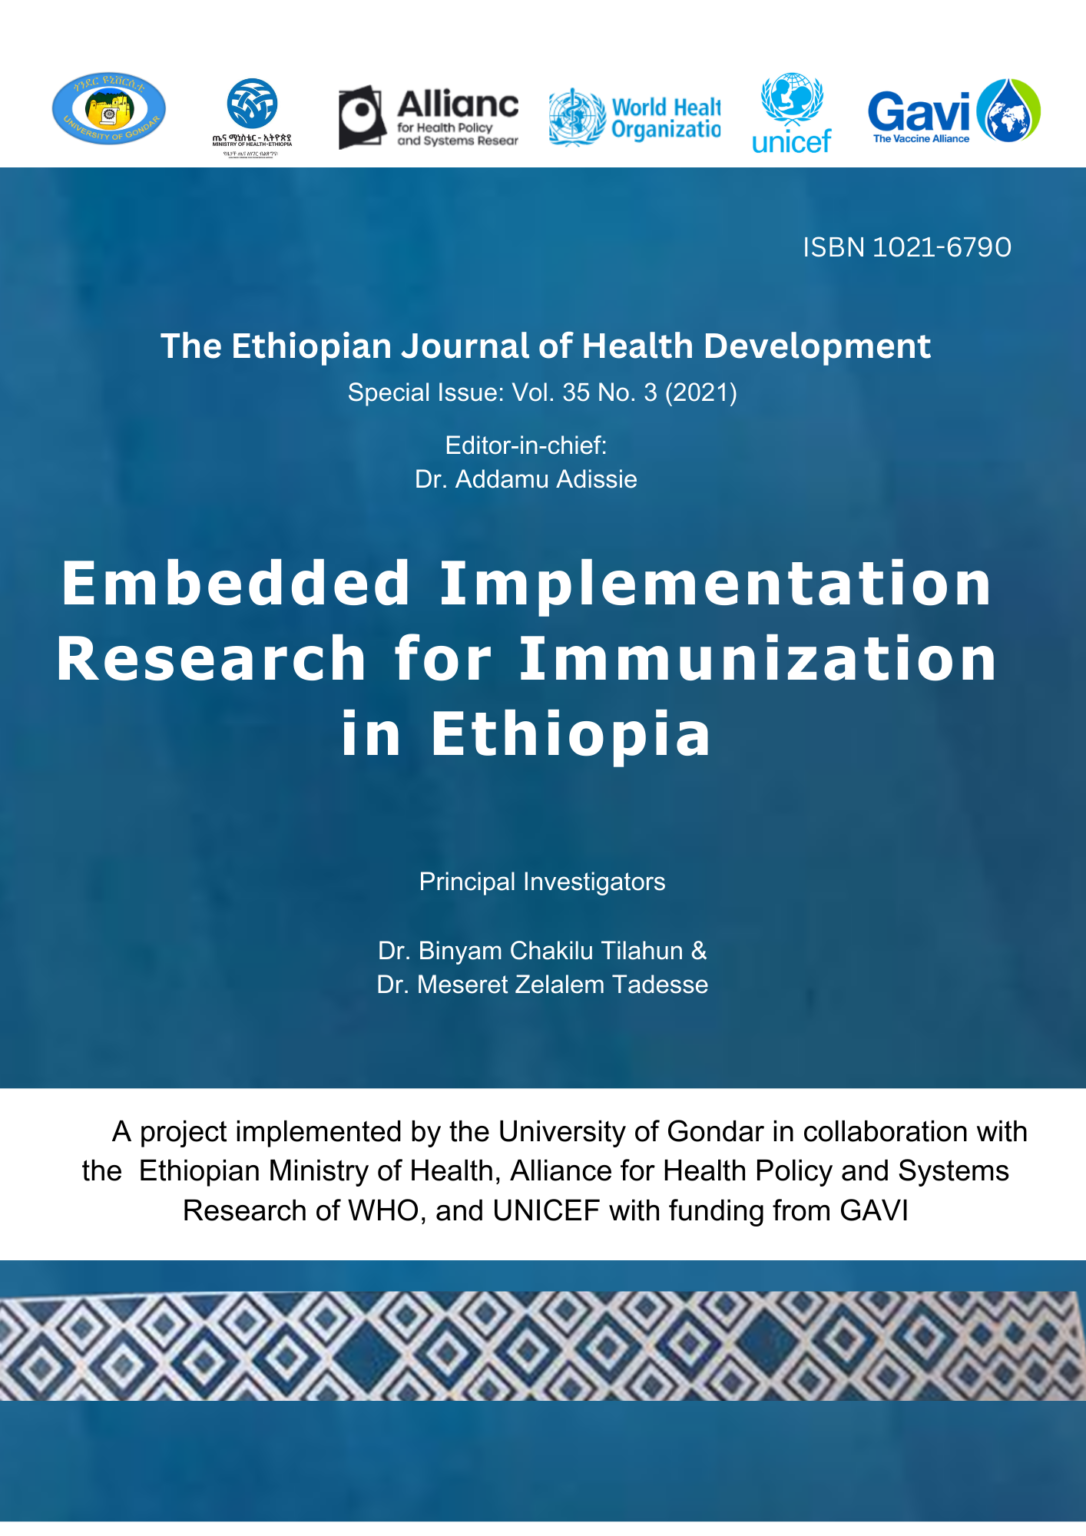 A_project_implemented_by_the_University_of_Gondar_in_collaboration (2)